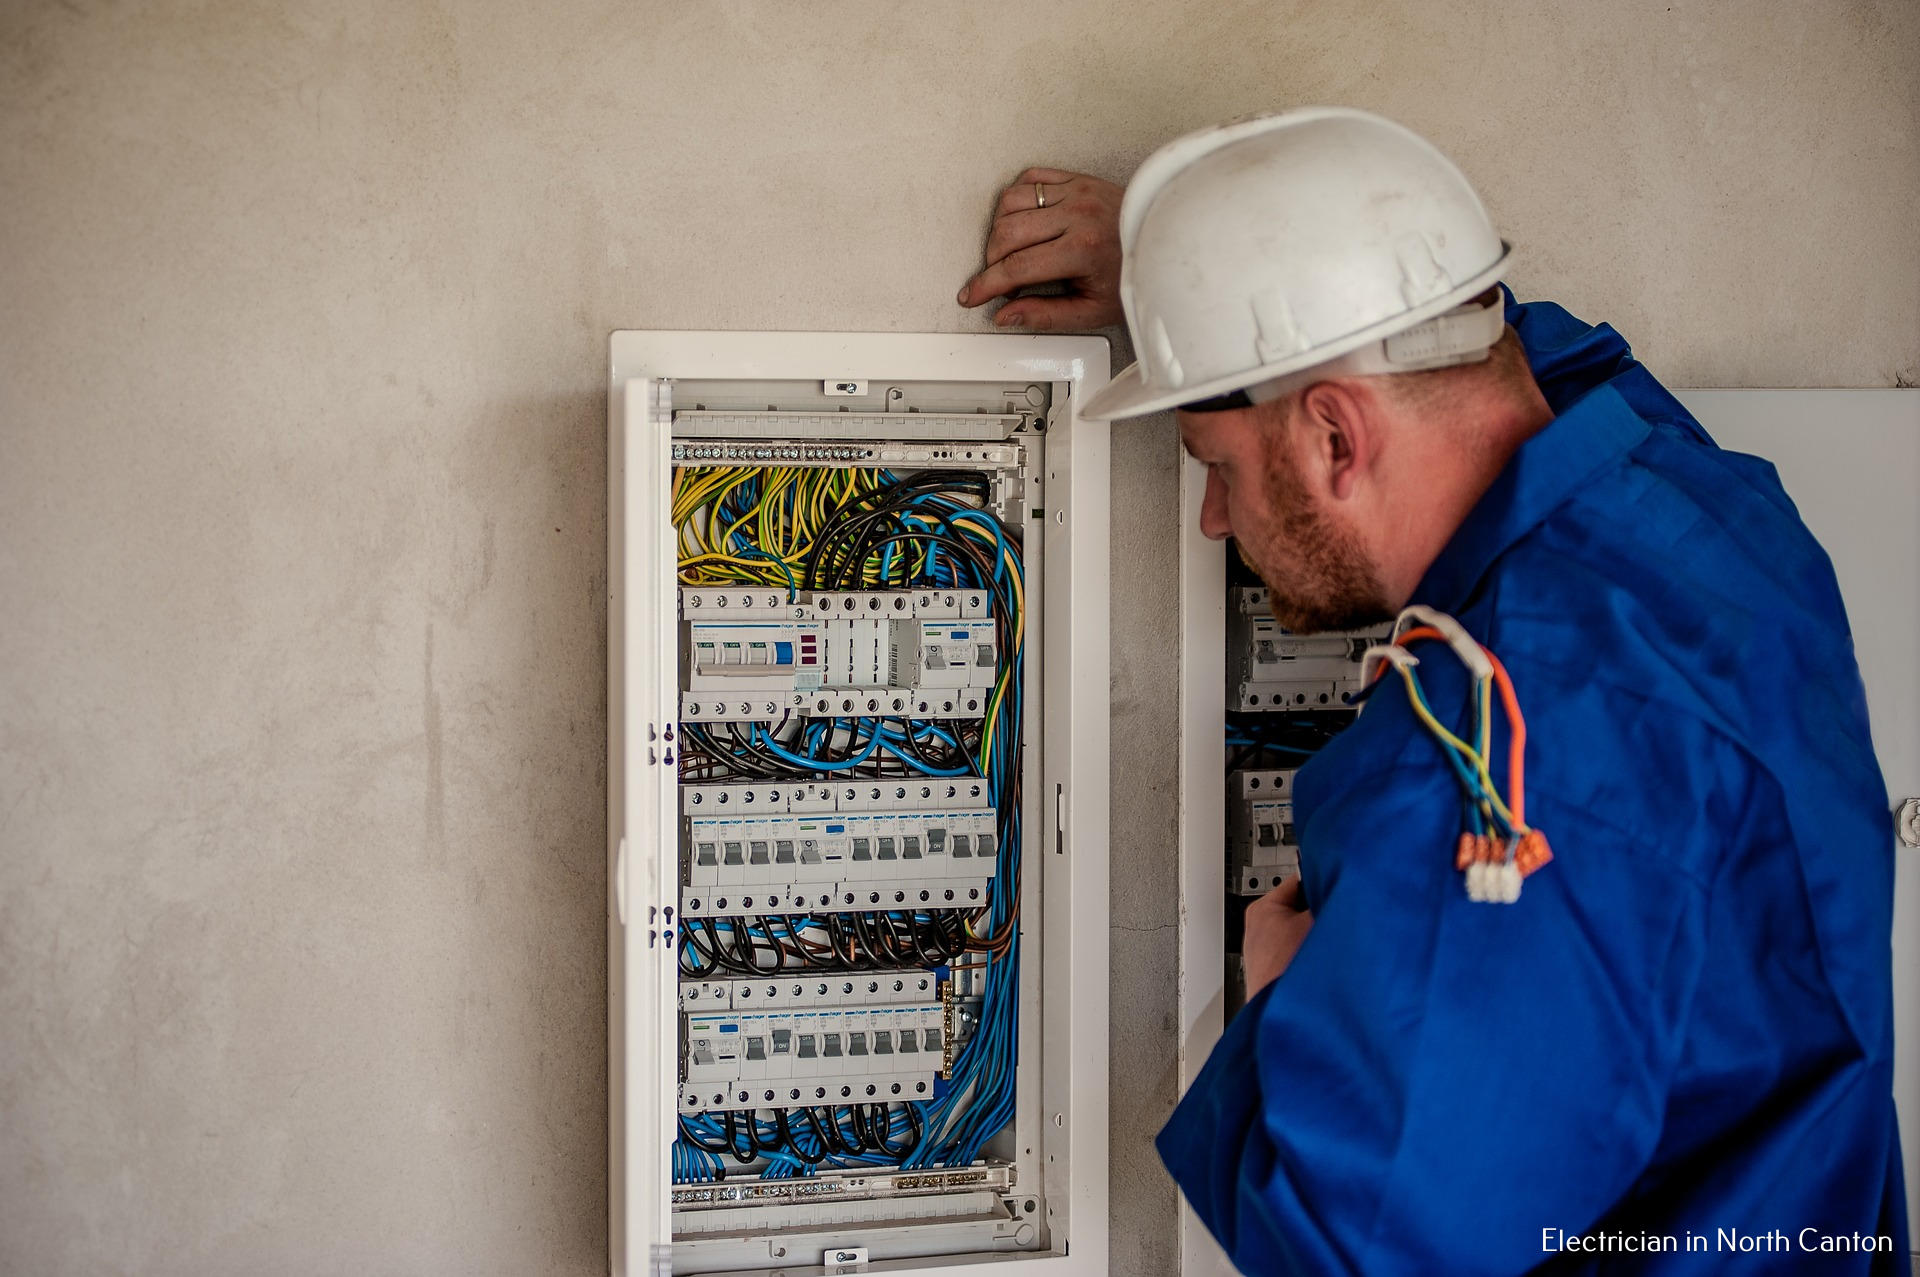 Entirewire Electrician Shares Signs to Hire an Electrician